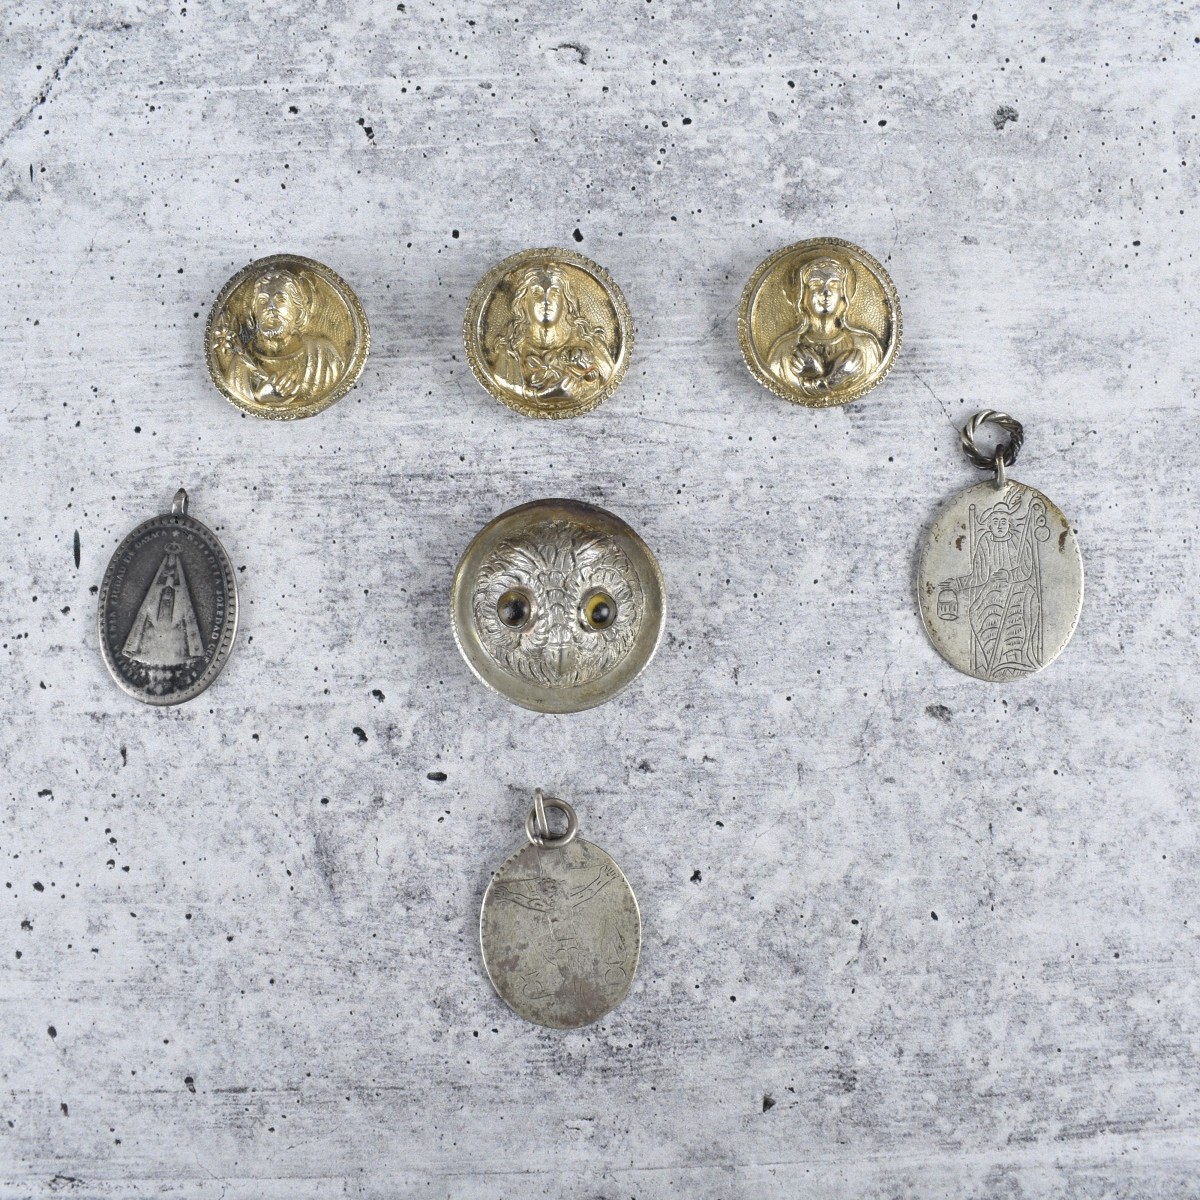 Spanish Colonial Ornaments and Pendants